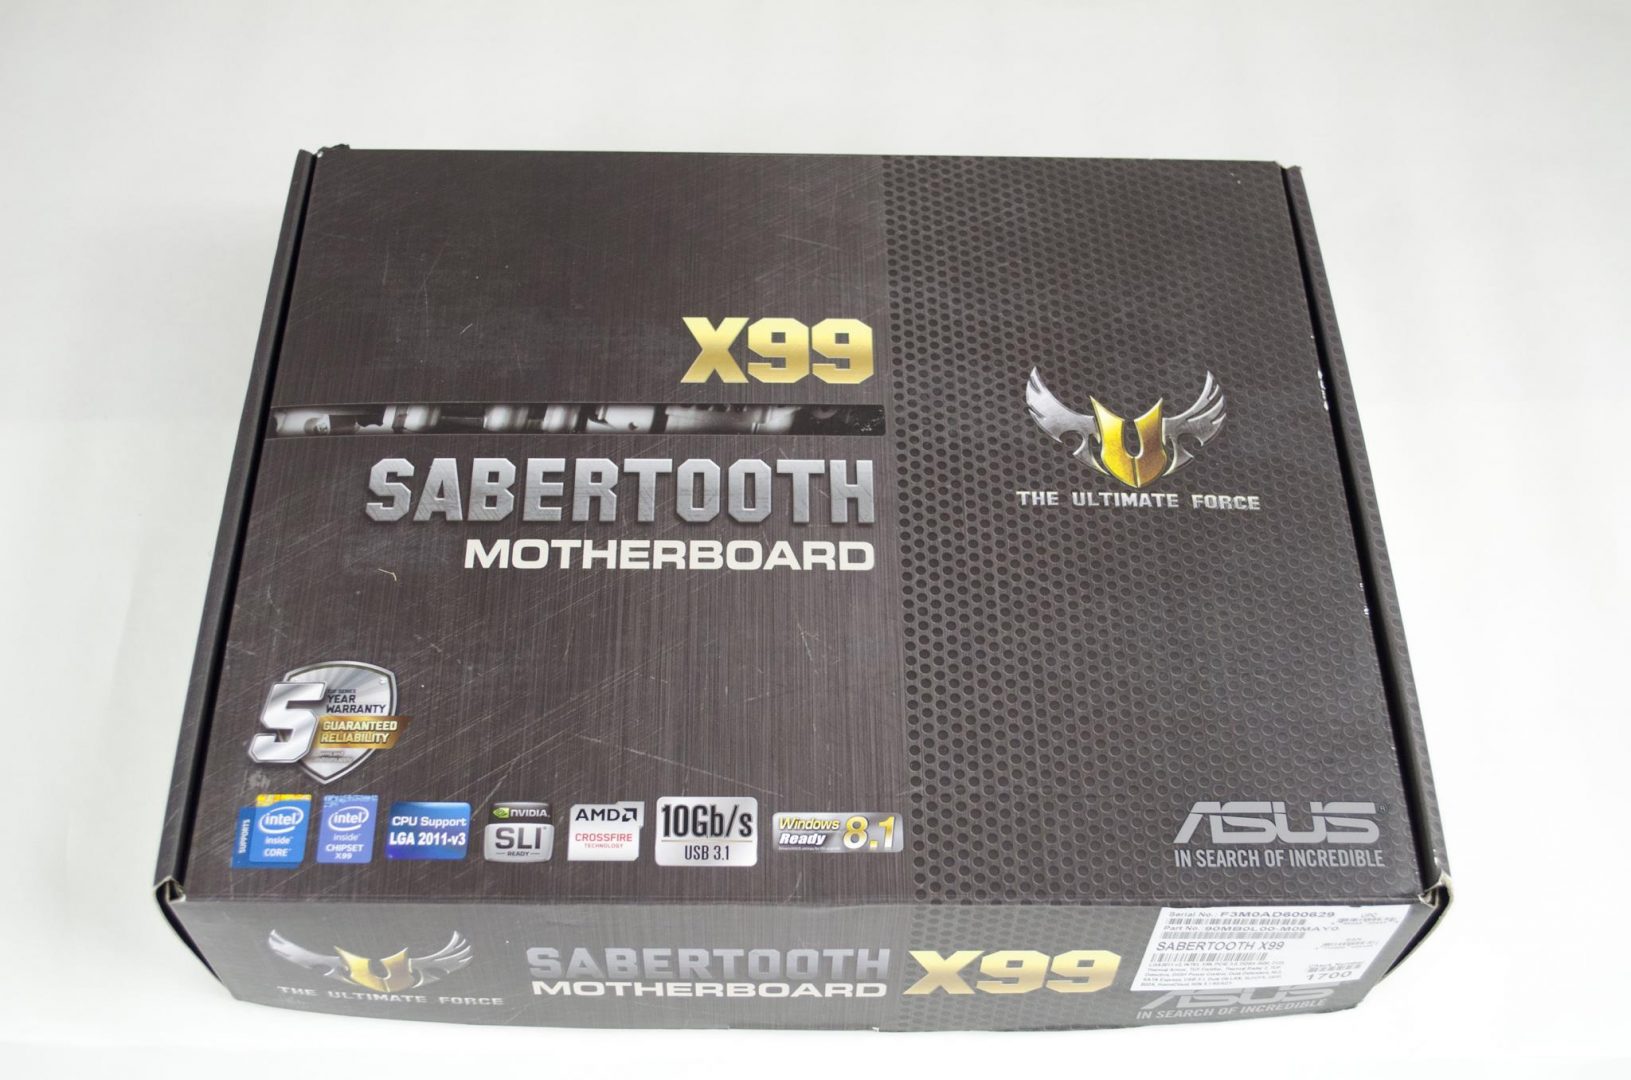 ASUS X99 Savertooth Motherboard Review